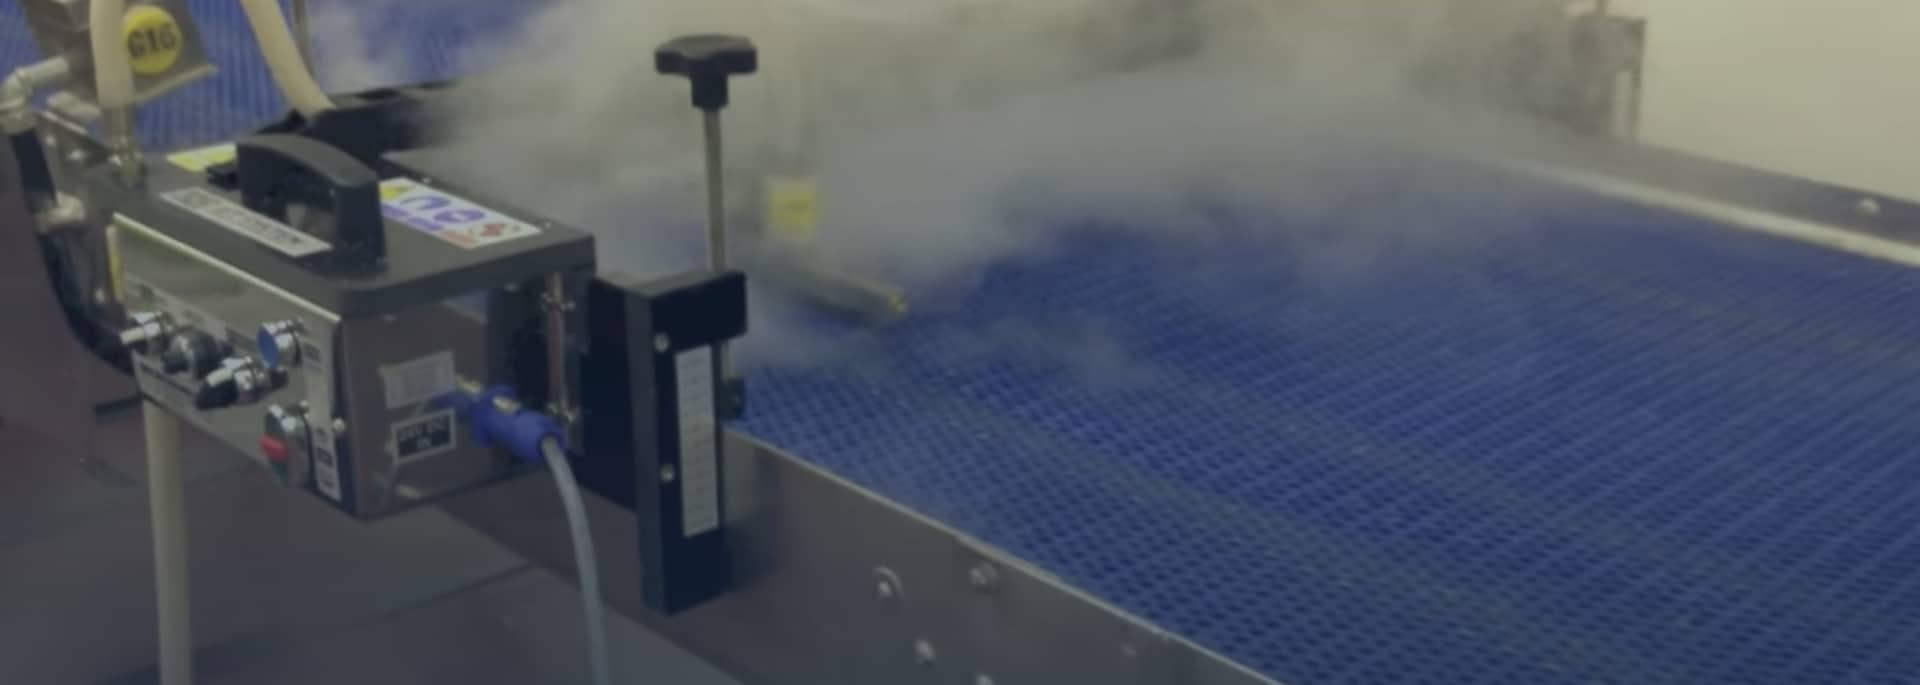 Steam Cleaning Insights: Industrial Steam Cleaning in Food Production